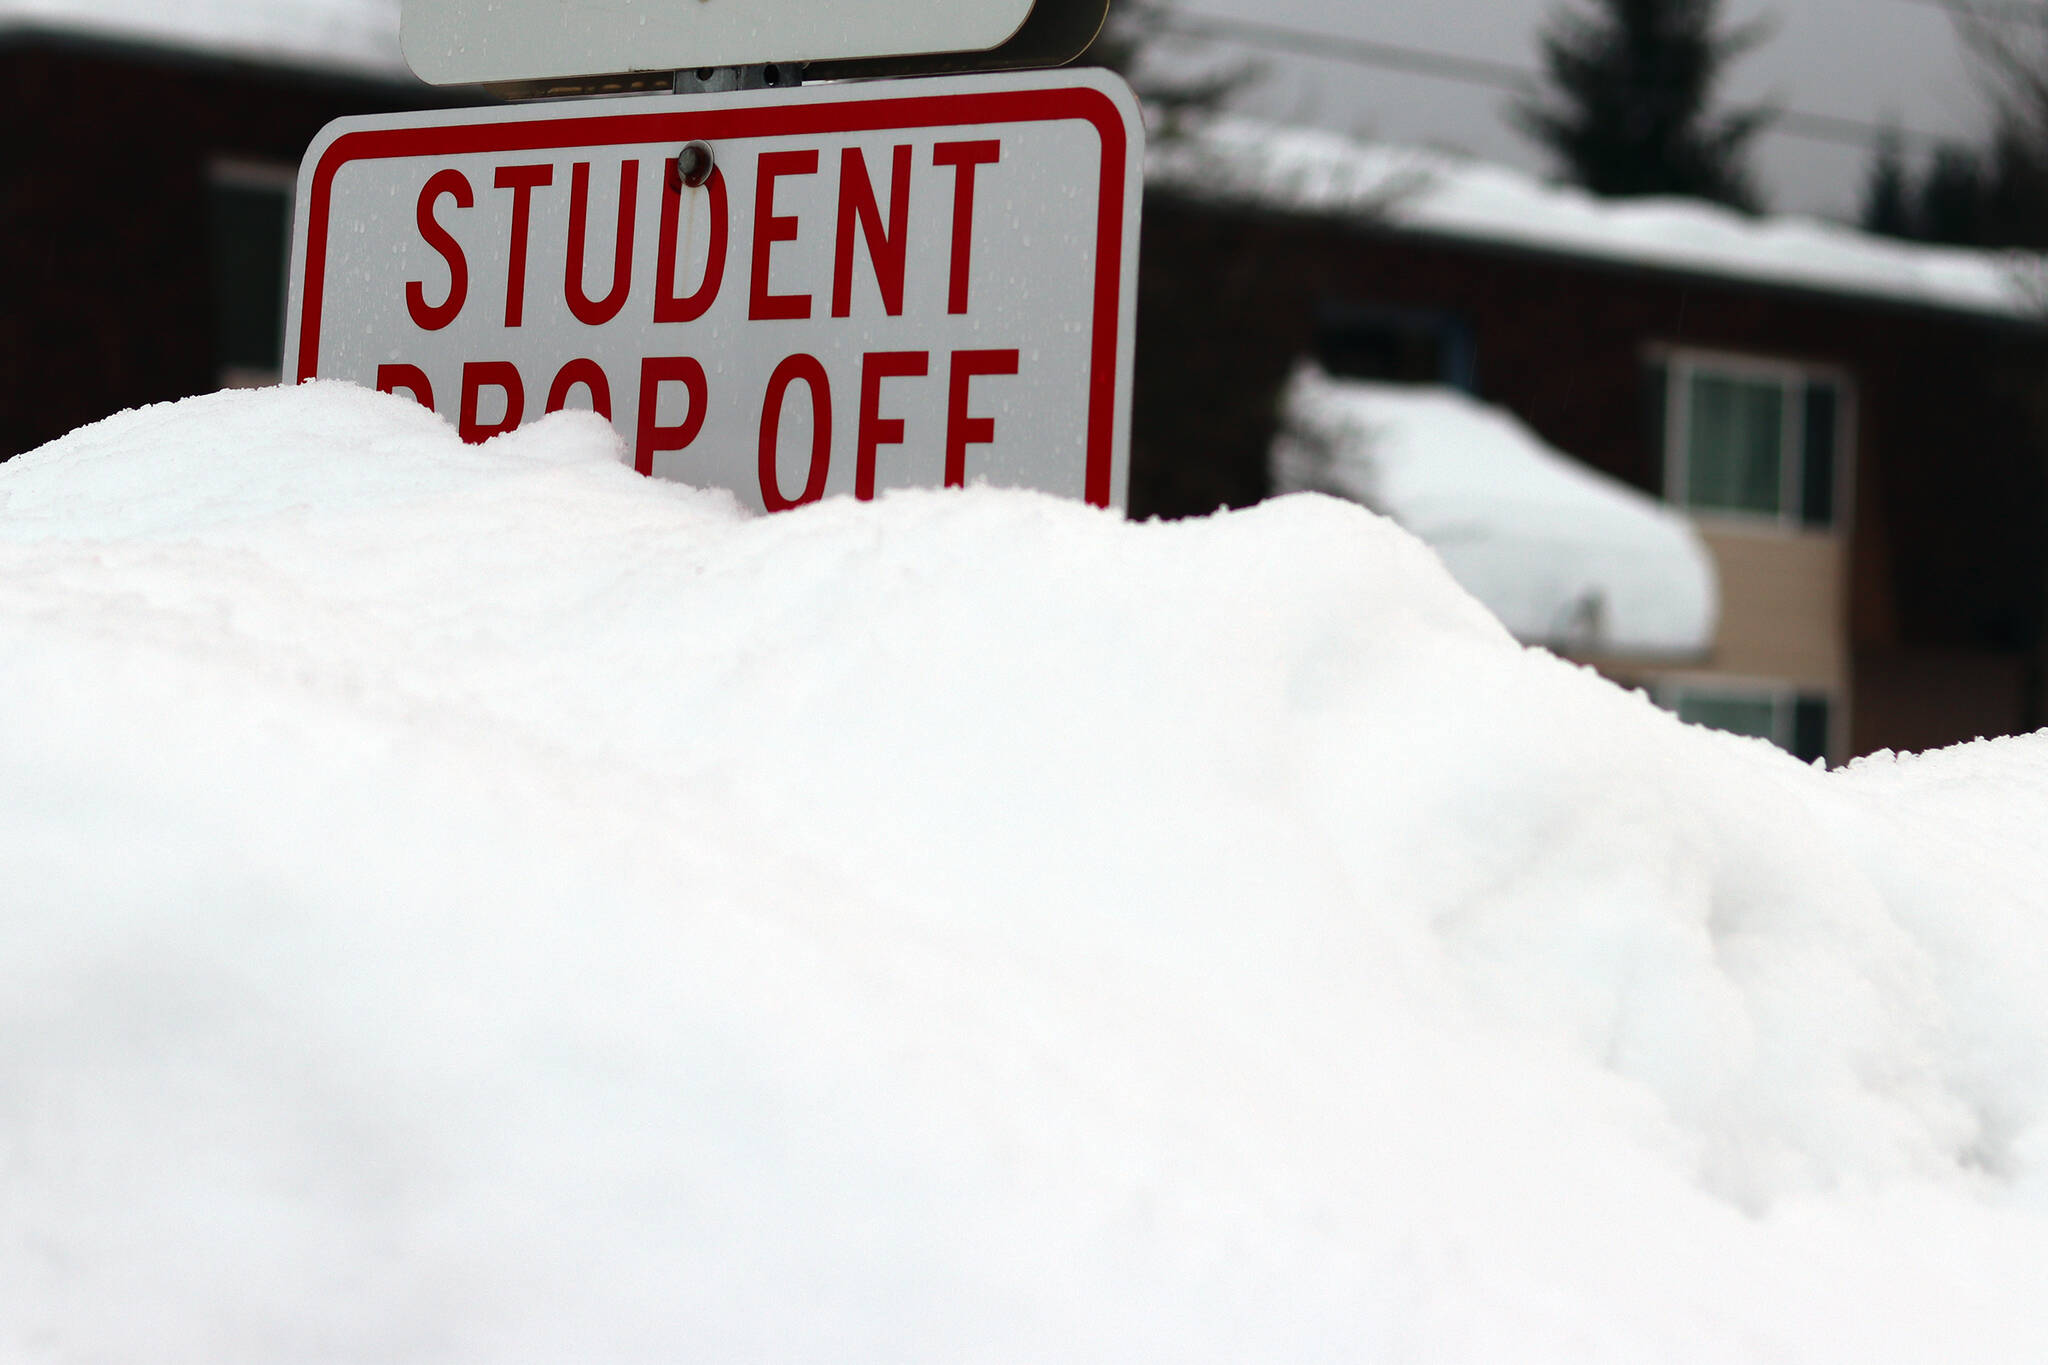 A mound of a snow obscures a “student drop off” sign near Sít’ Eetí Shaanàx-Glacier Valley School. School officials announced on Monday that classes were canceled for Tuesday due to weather. (Ben Hohenstatt / Juneau Empire)